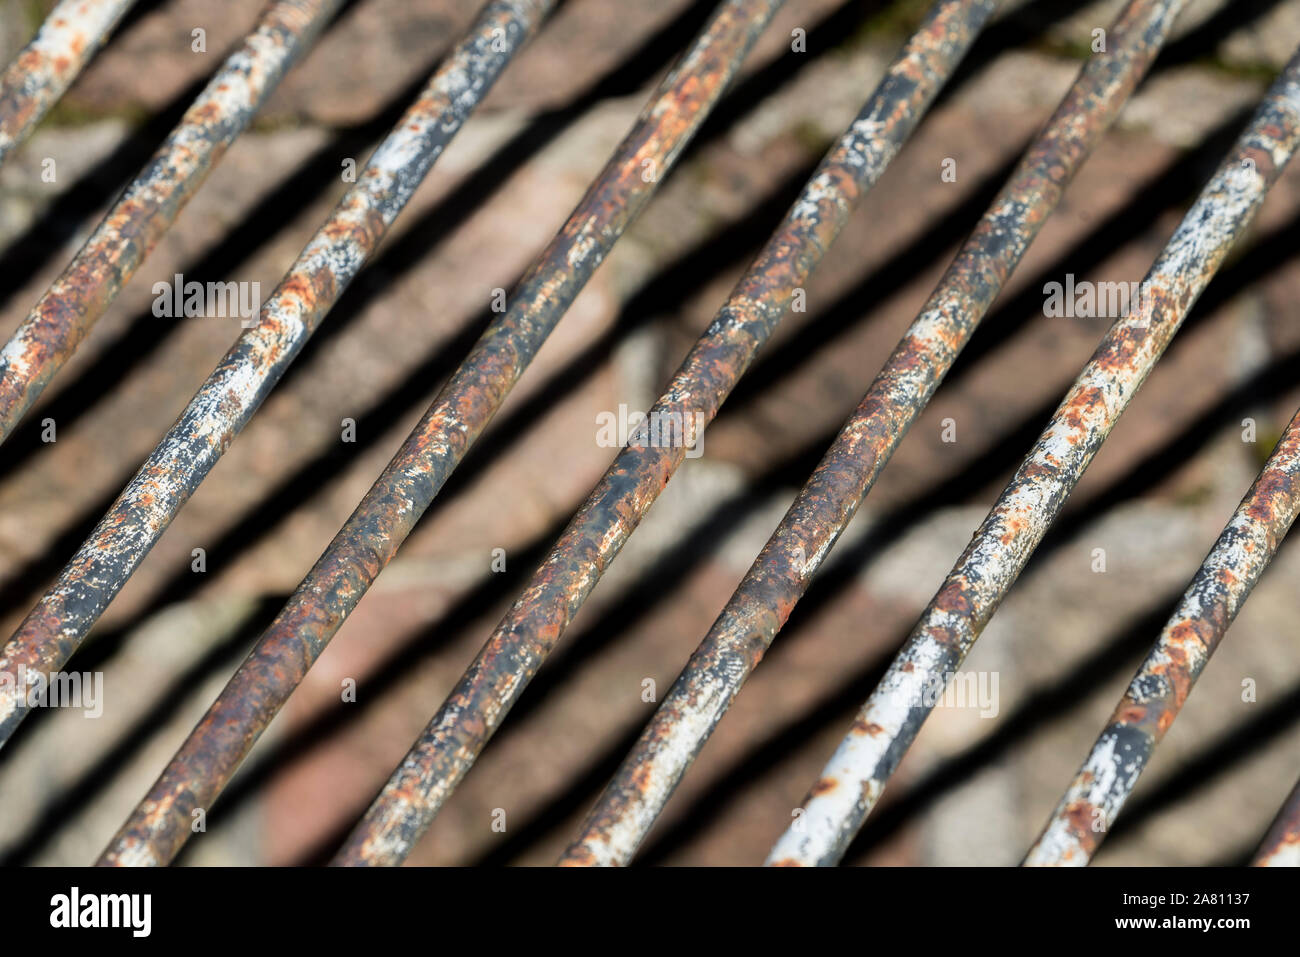 old rusty metal grid, metal structure Stock Photo